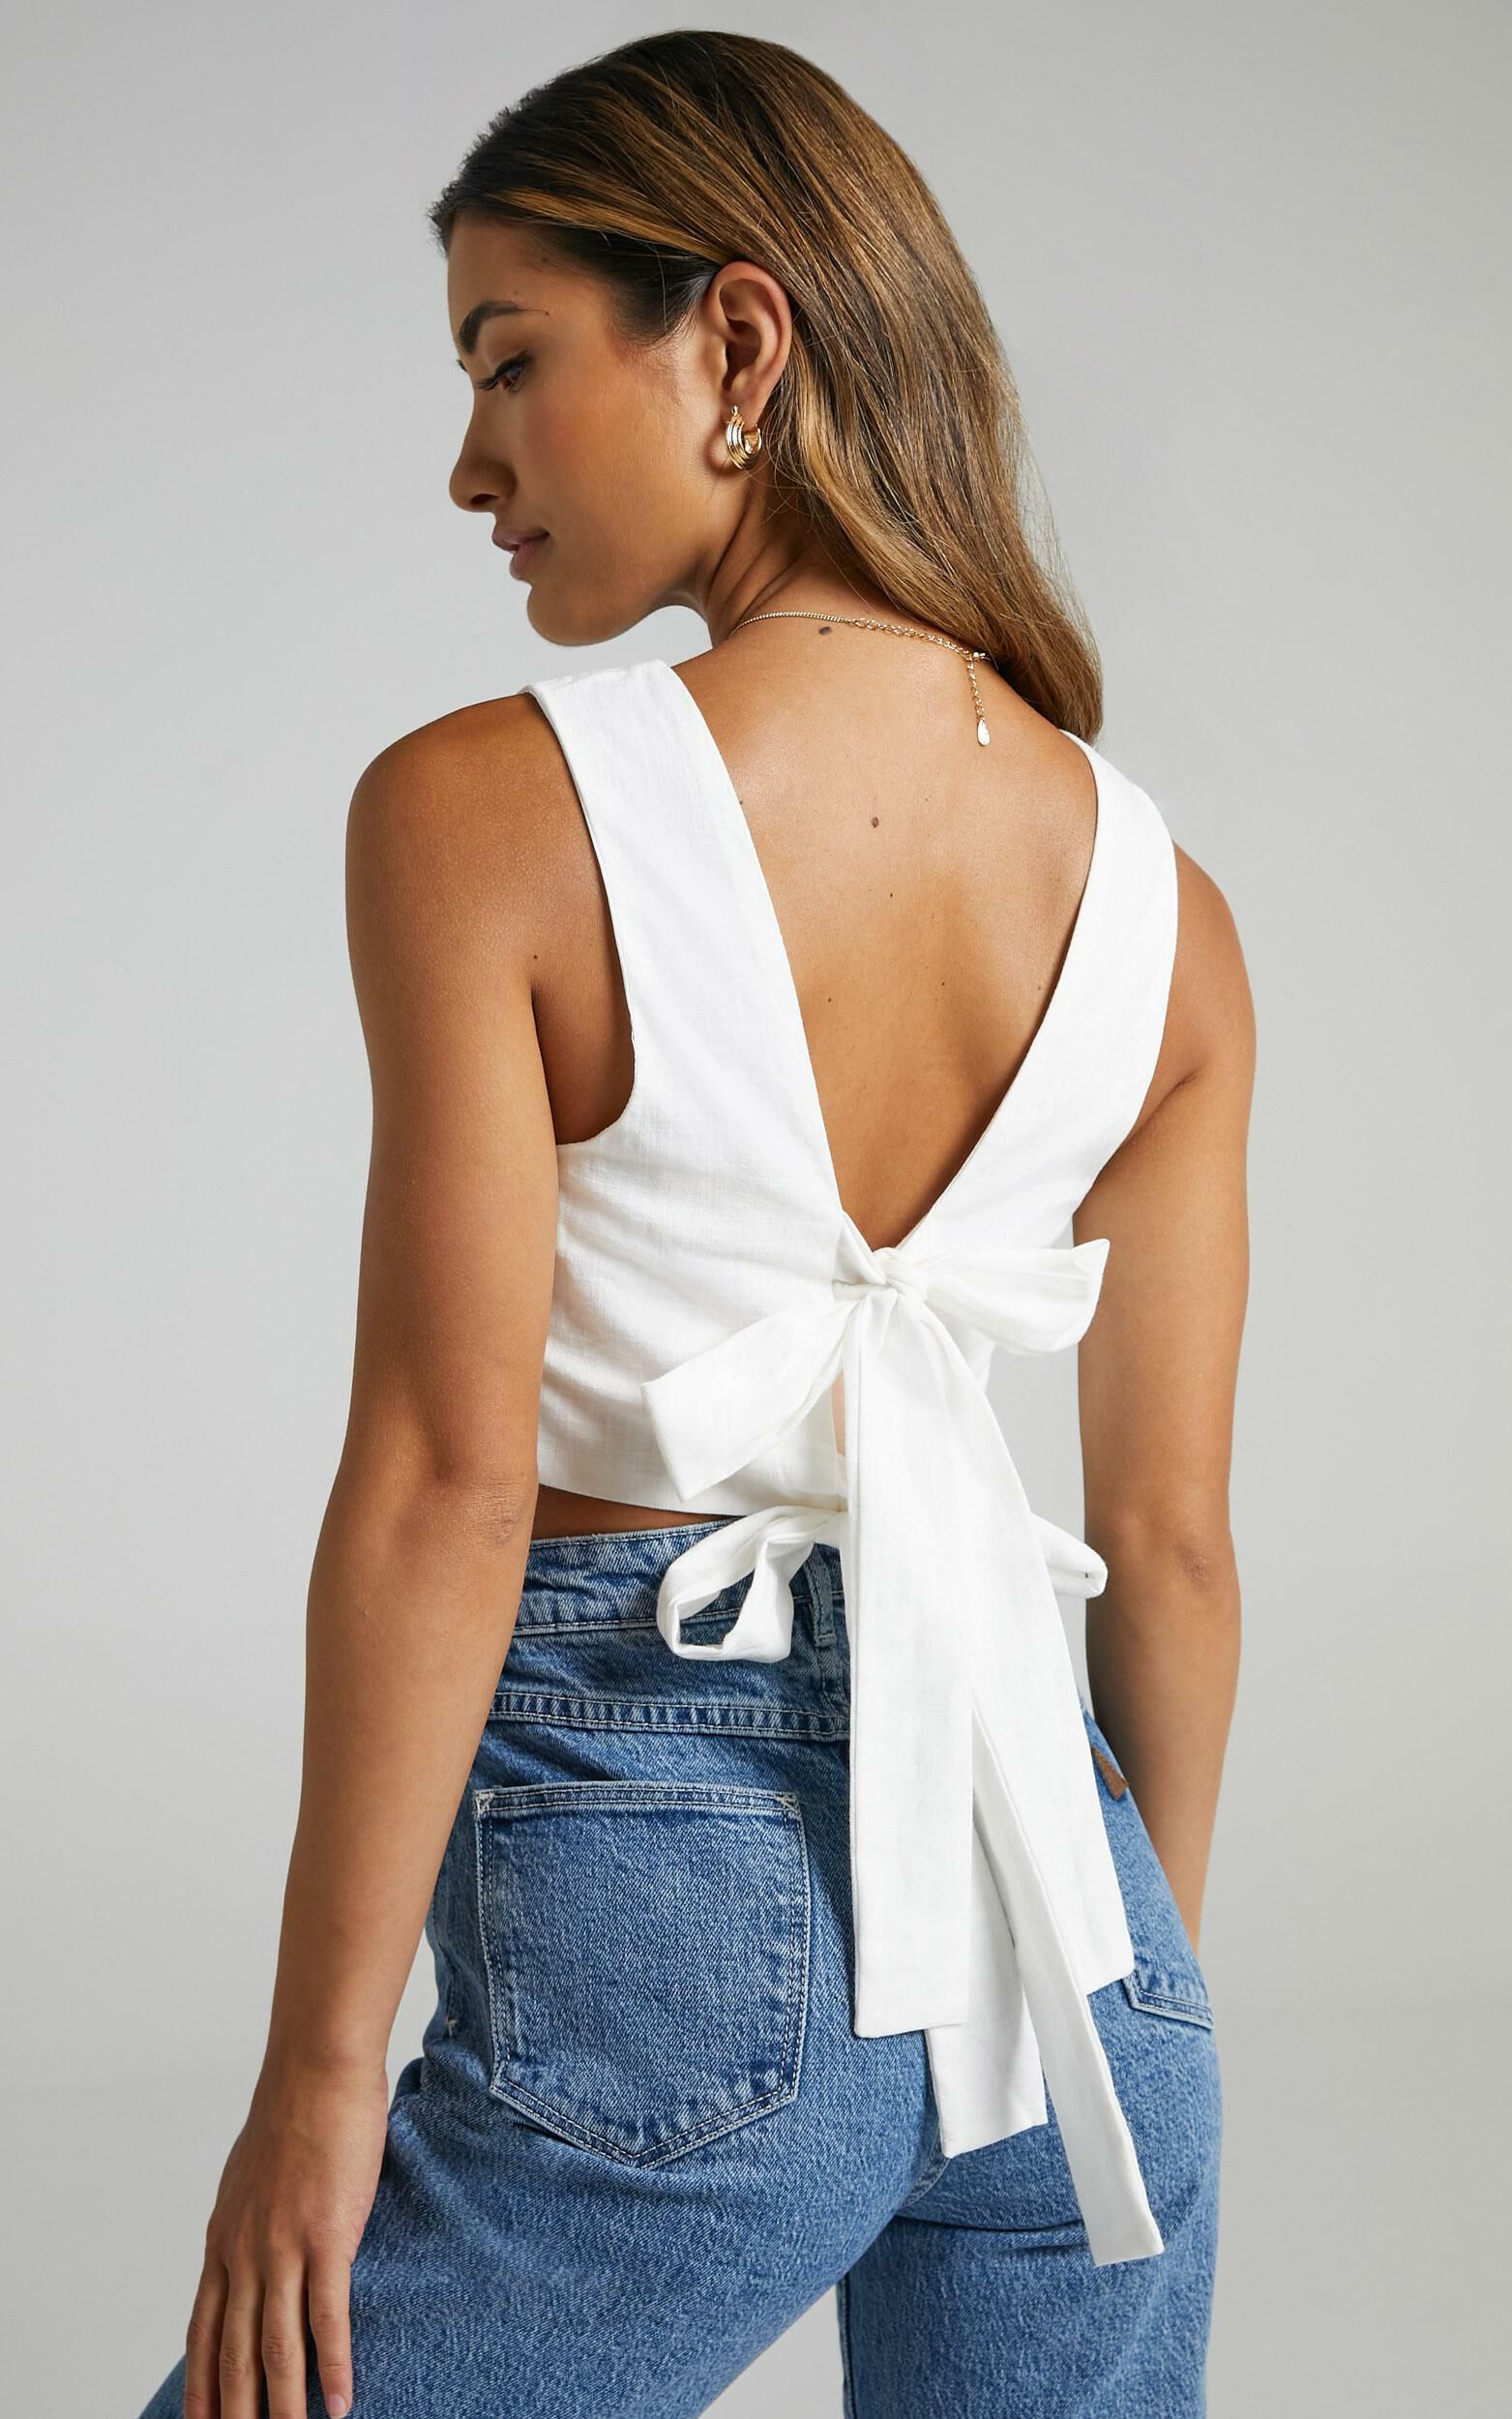 Loxley Top - Tie Up Top in White - 06, WHT4